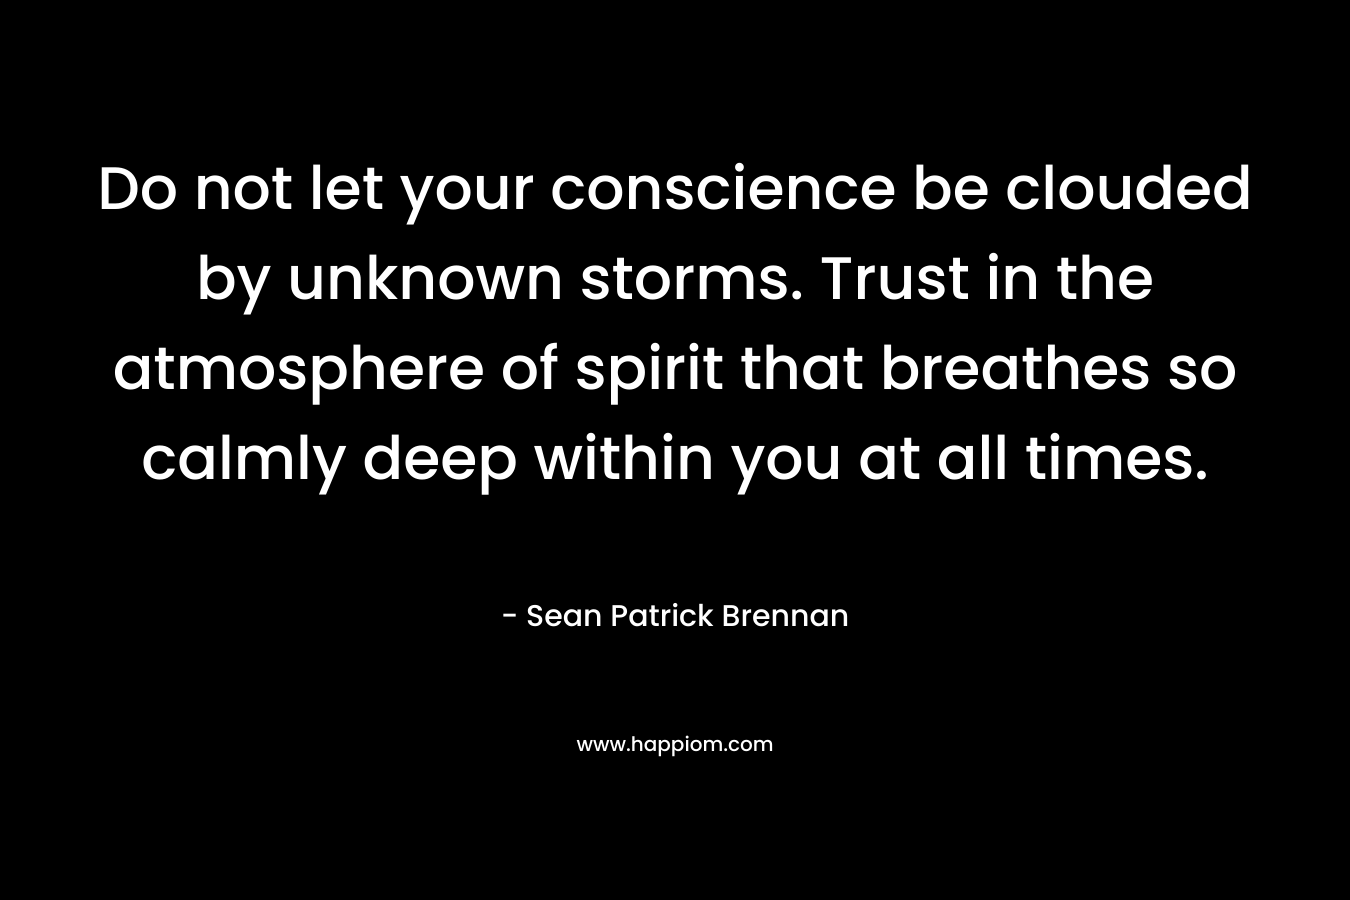 Do not let your conscience be clouded by unknown storms. Trust in the atmosphere of spirit that breathes so calmly deep within you at all times. – Sean Patrick Brennan